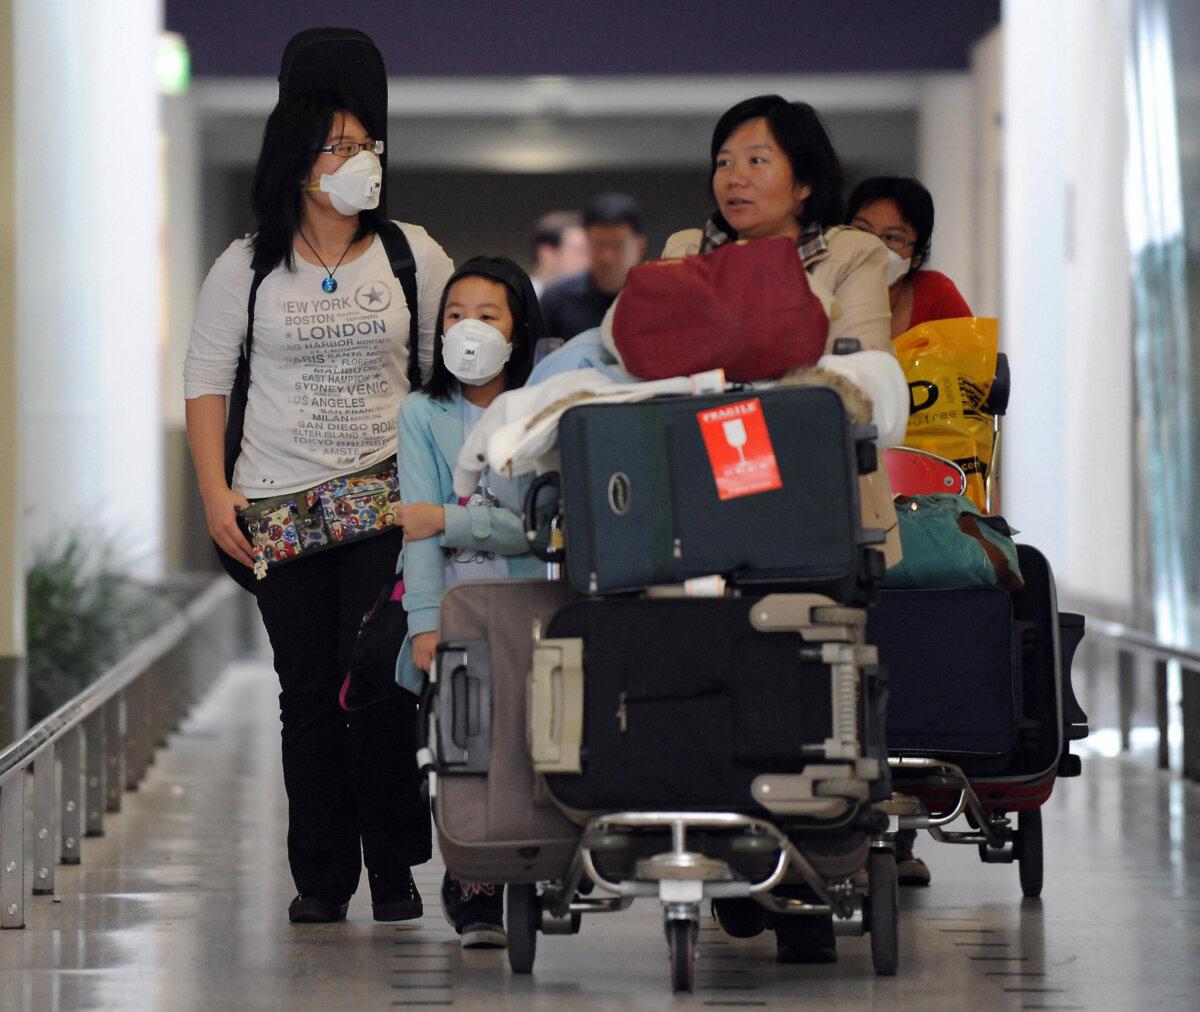 A family from Hong Kong arrives at Sydney International Airport in Australia on April 28, 2009. (Torsten Blackwood/AFP via Getty Images)